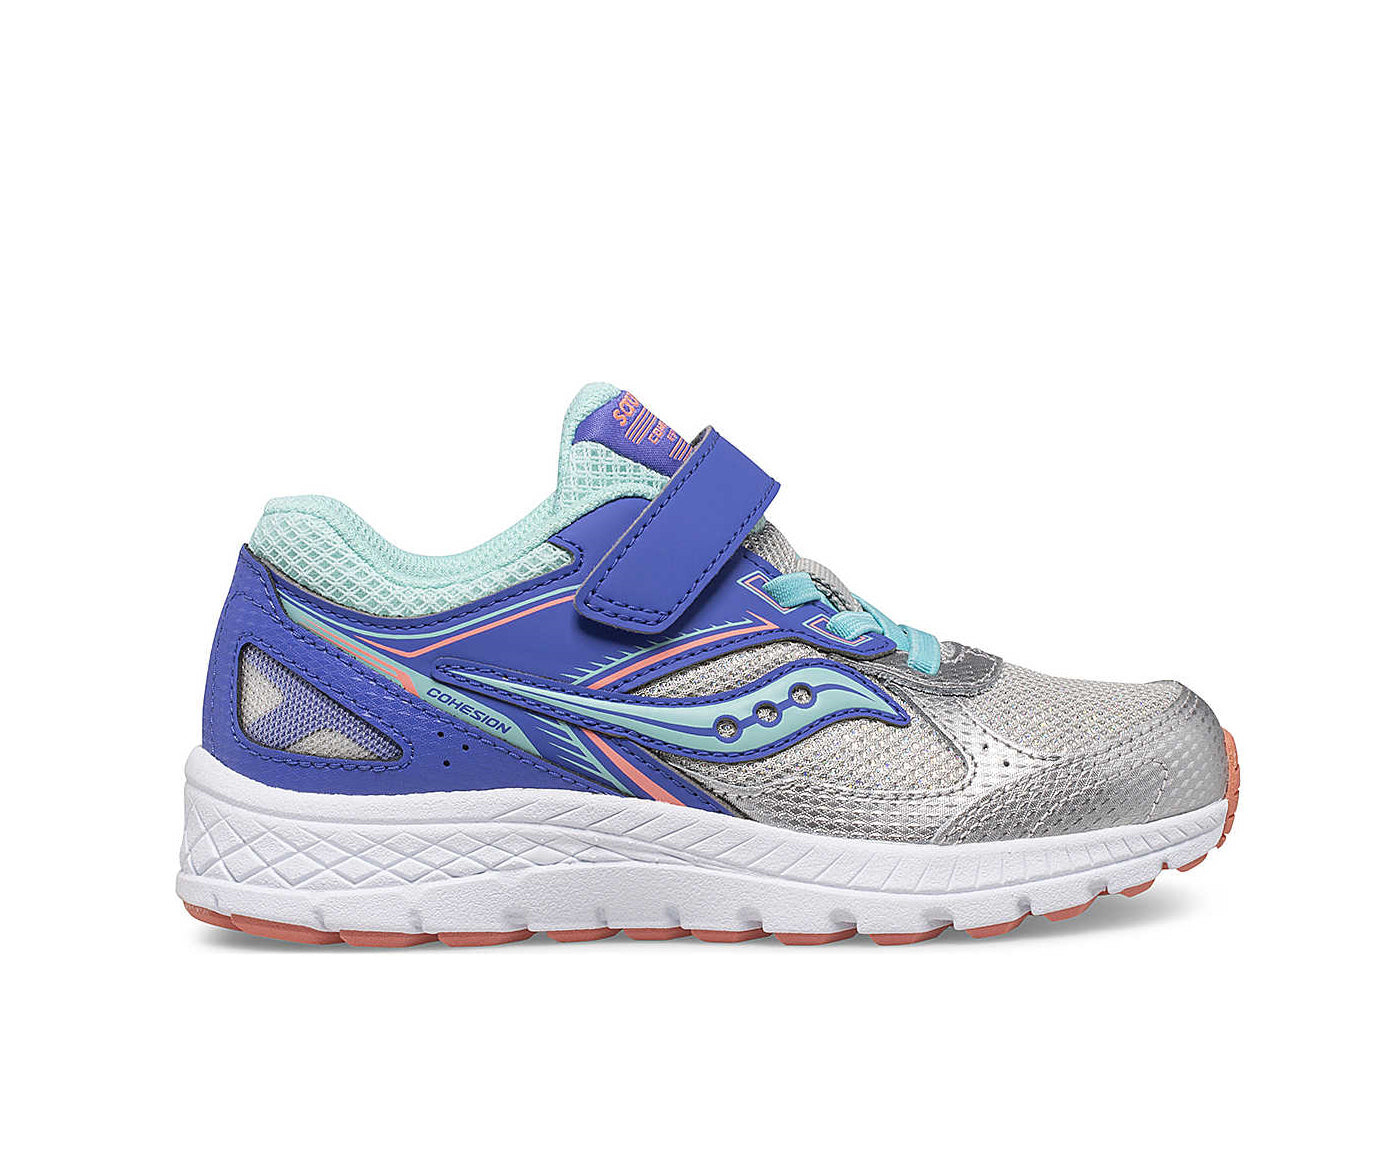 A silver and mint low-cut sneaker with indigo accents and a velcro strap.